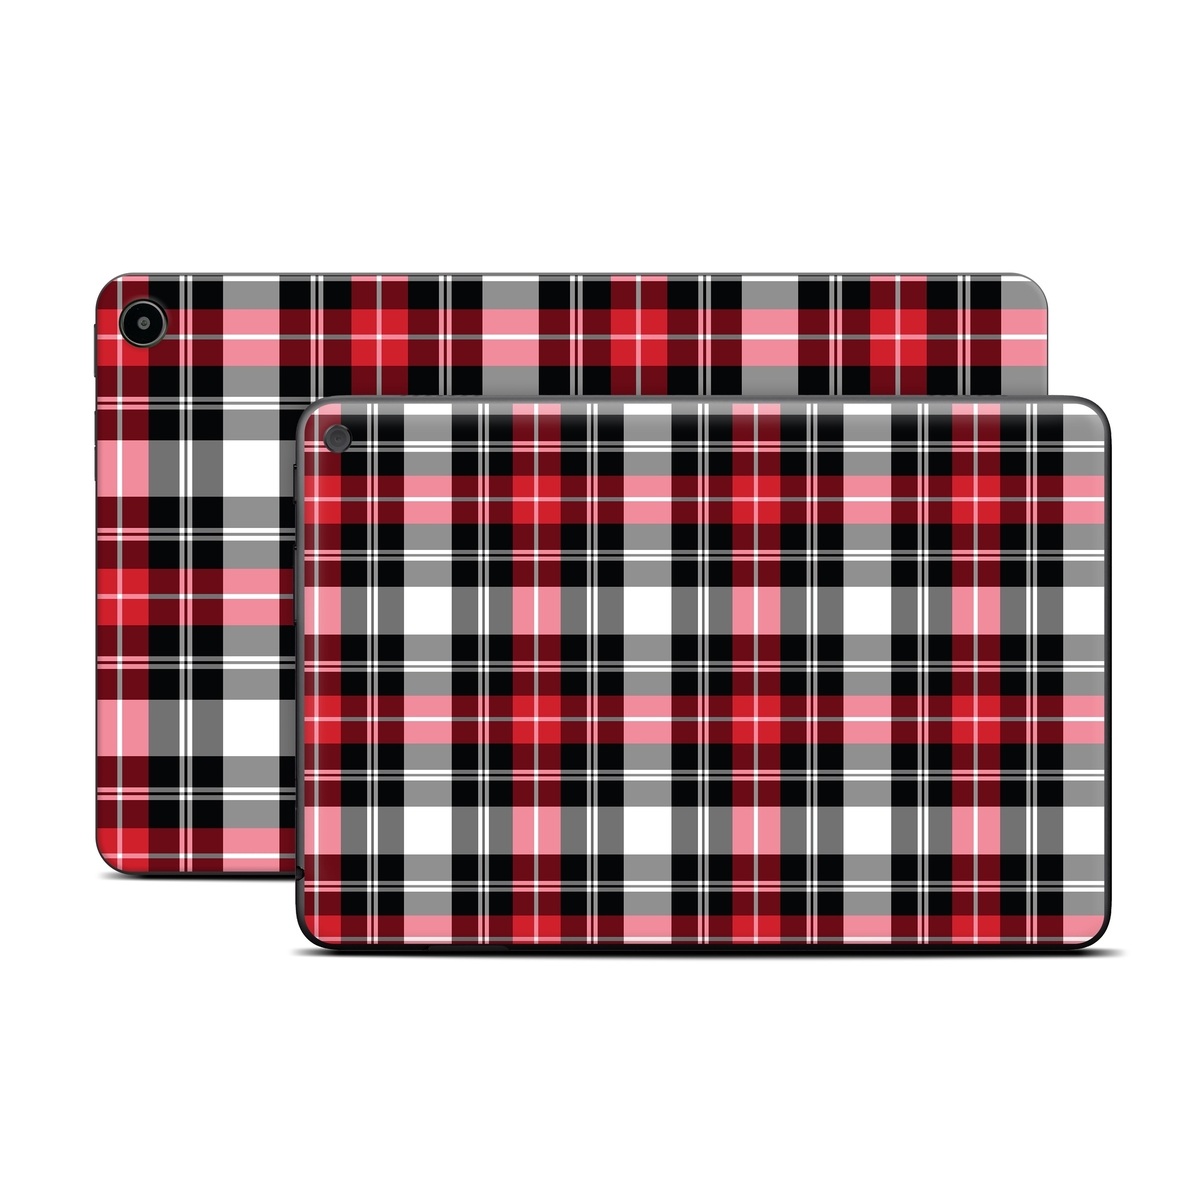 Amazon Fire Tablet Series Skin Skin design of Plaid, Tartan, Pattern, Red, Textile, Design, Line, Pink, Magenta, Square, with black, gray, pink, red, white colors